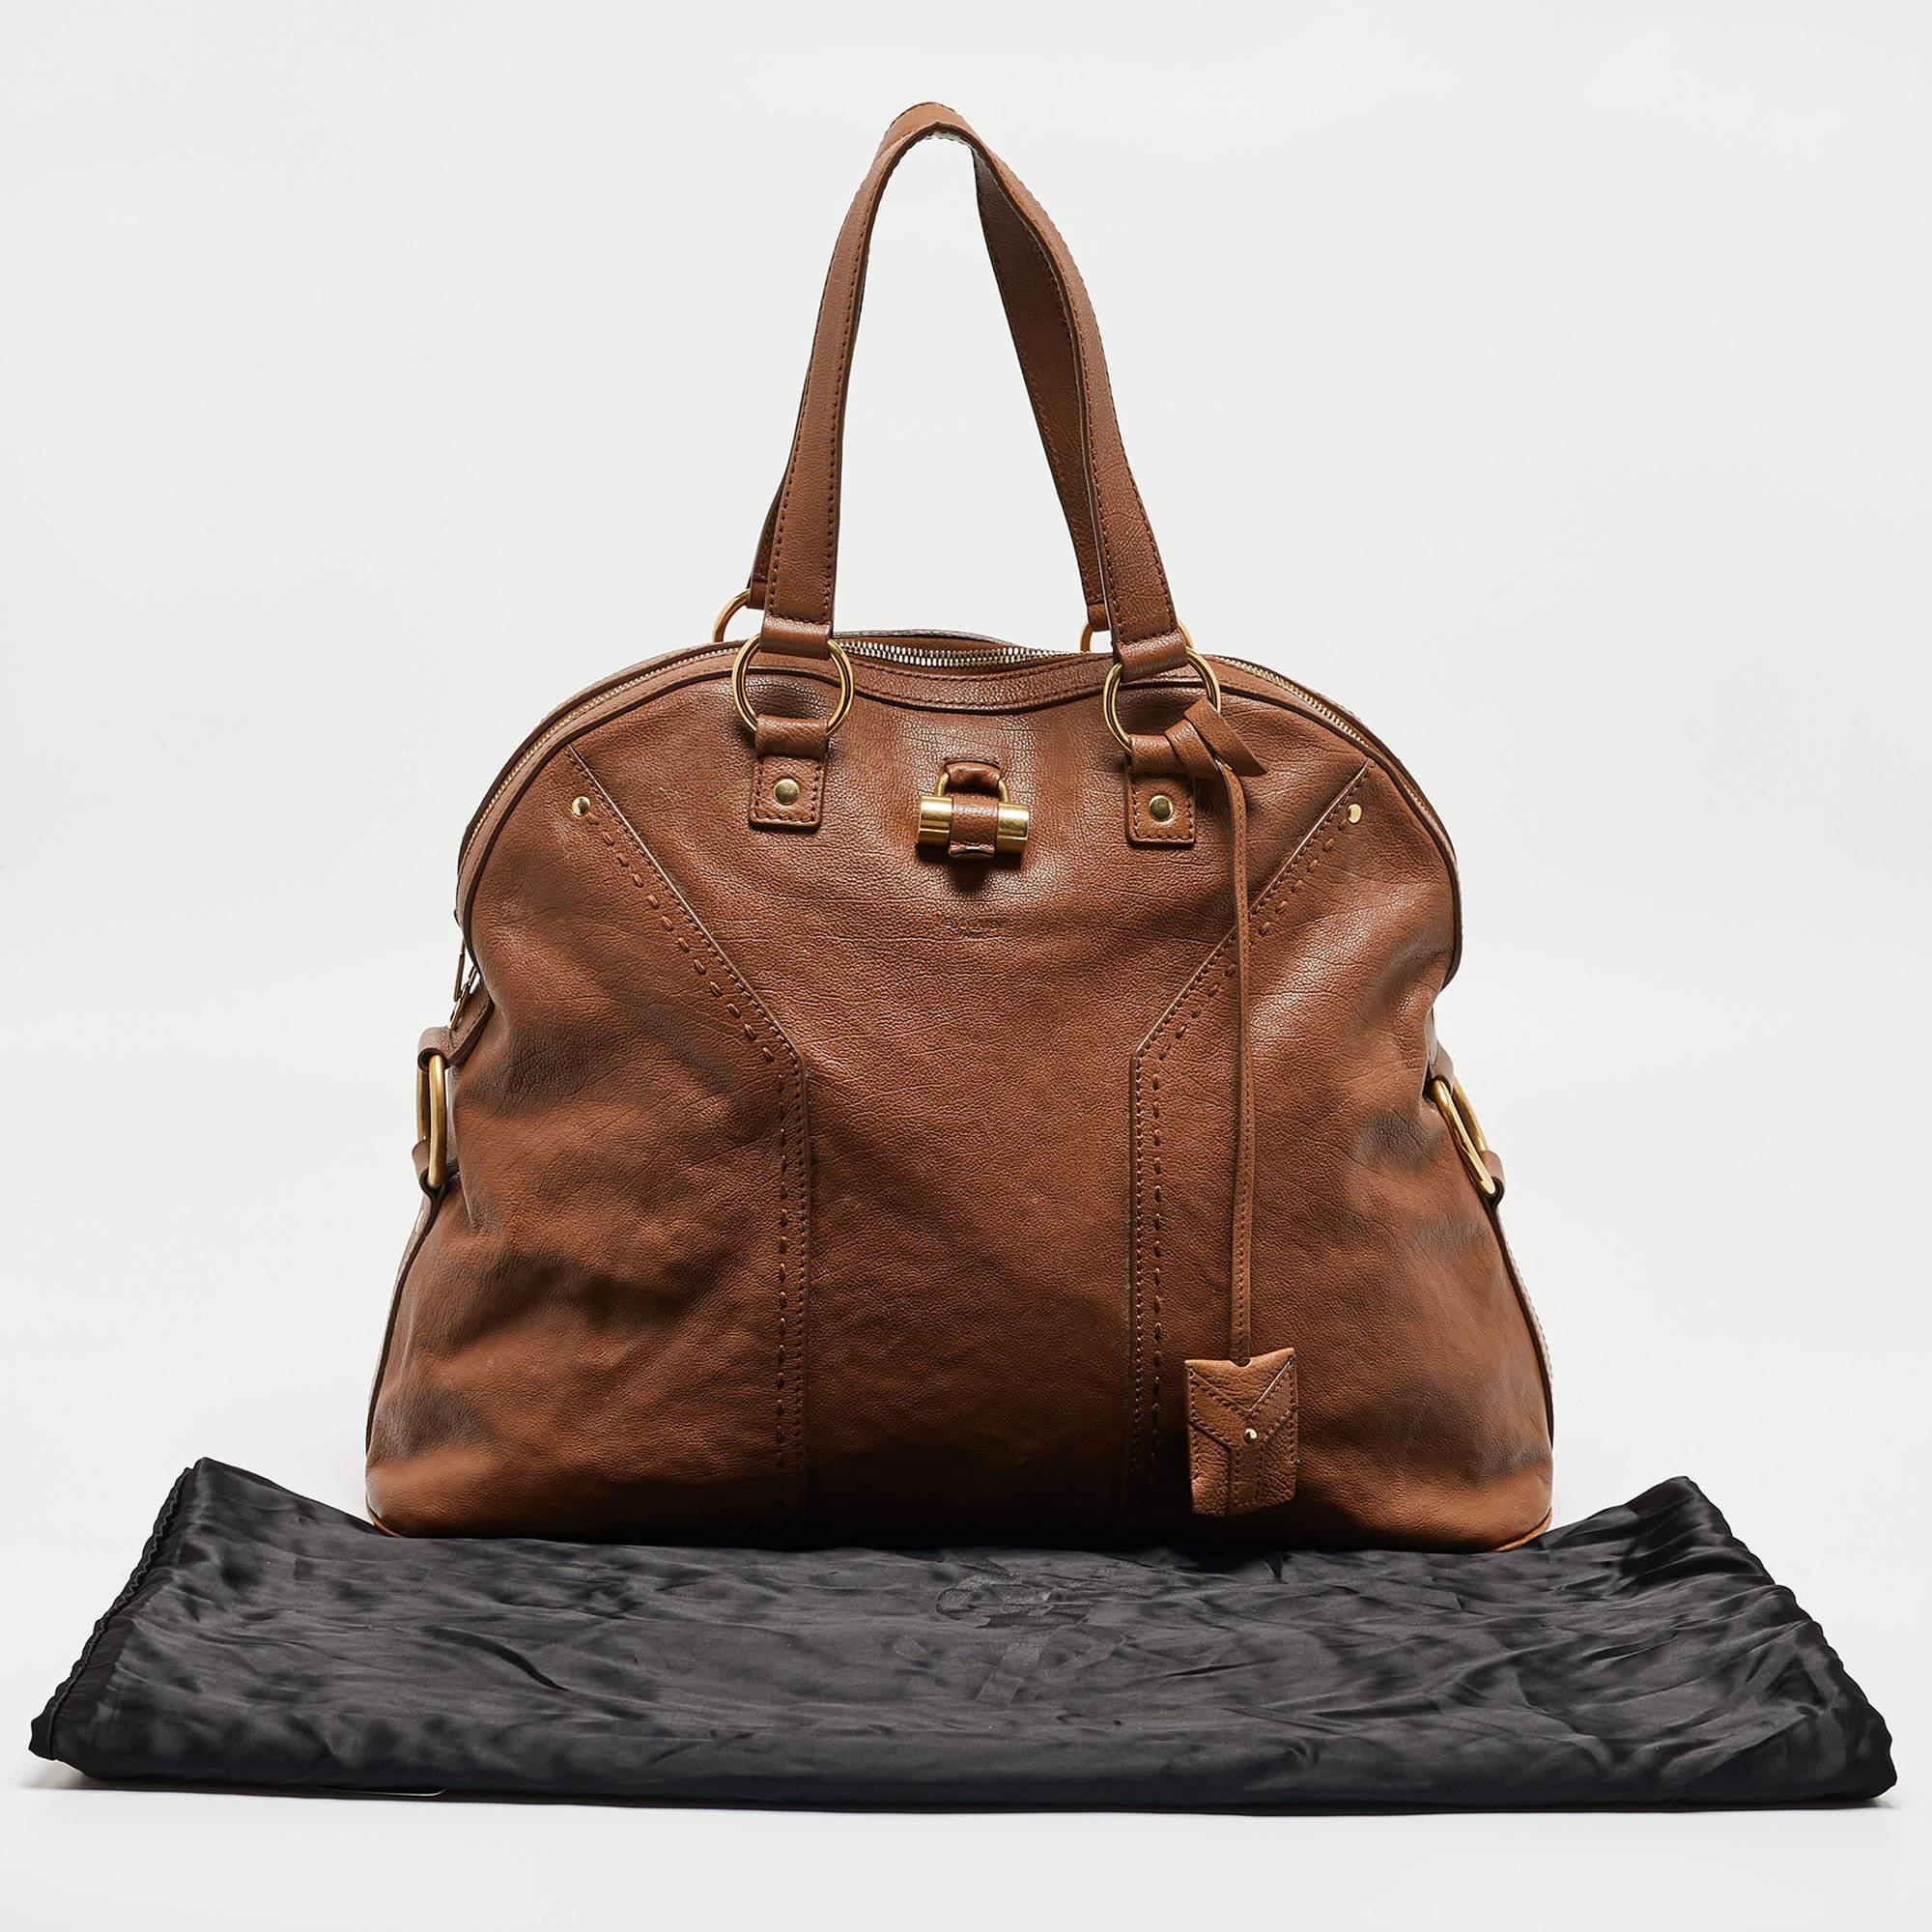 Yves Saint Laurent Brown Leather Oversized Muse Bag 15